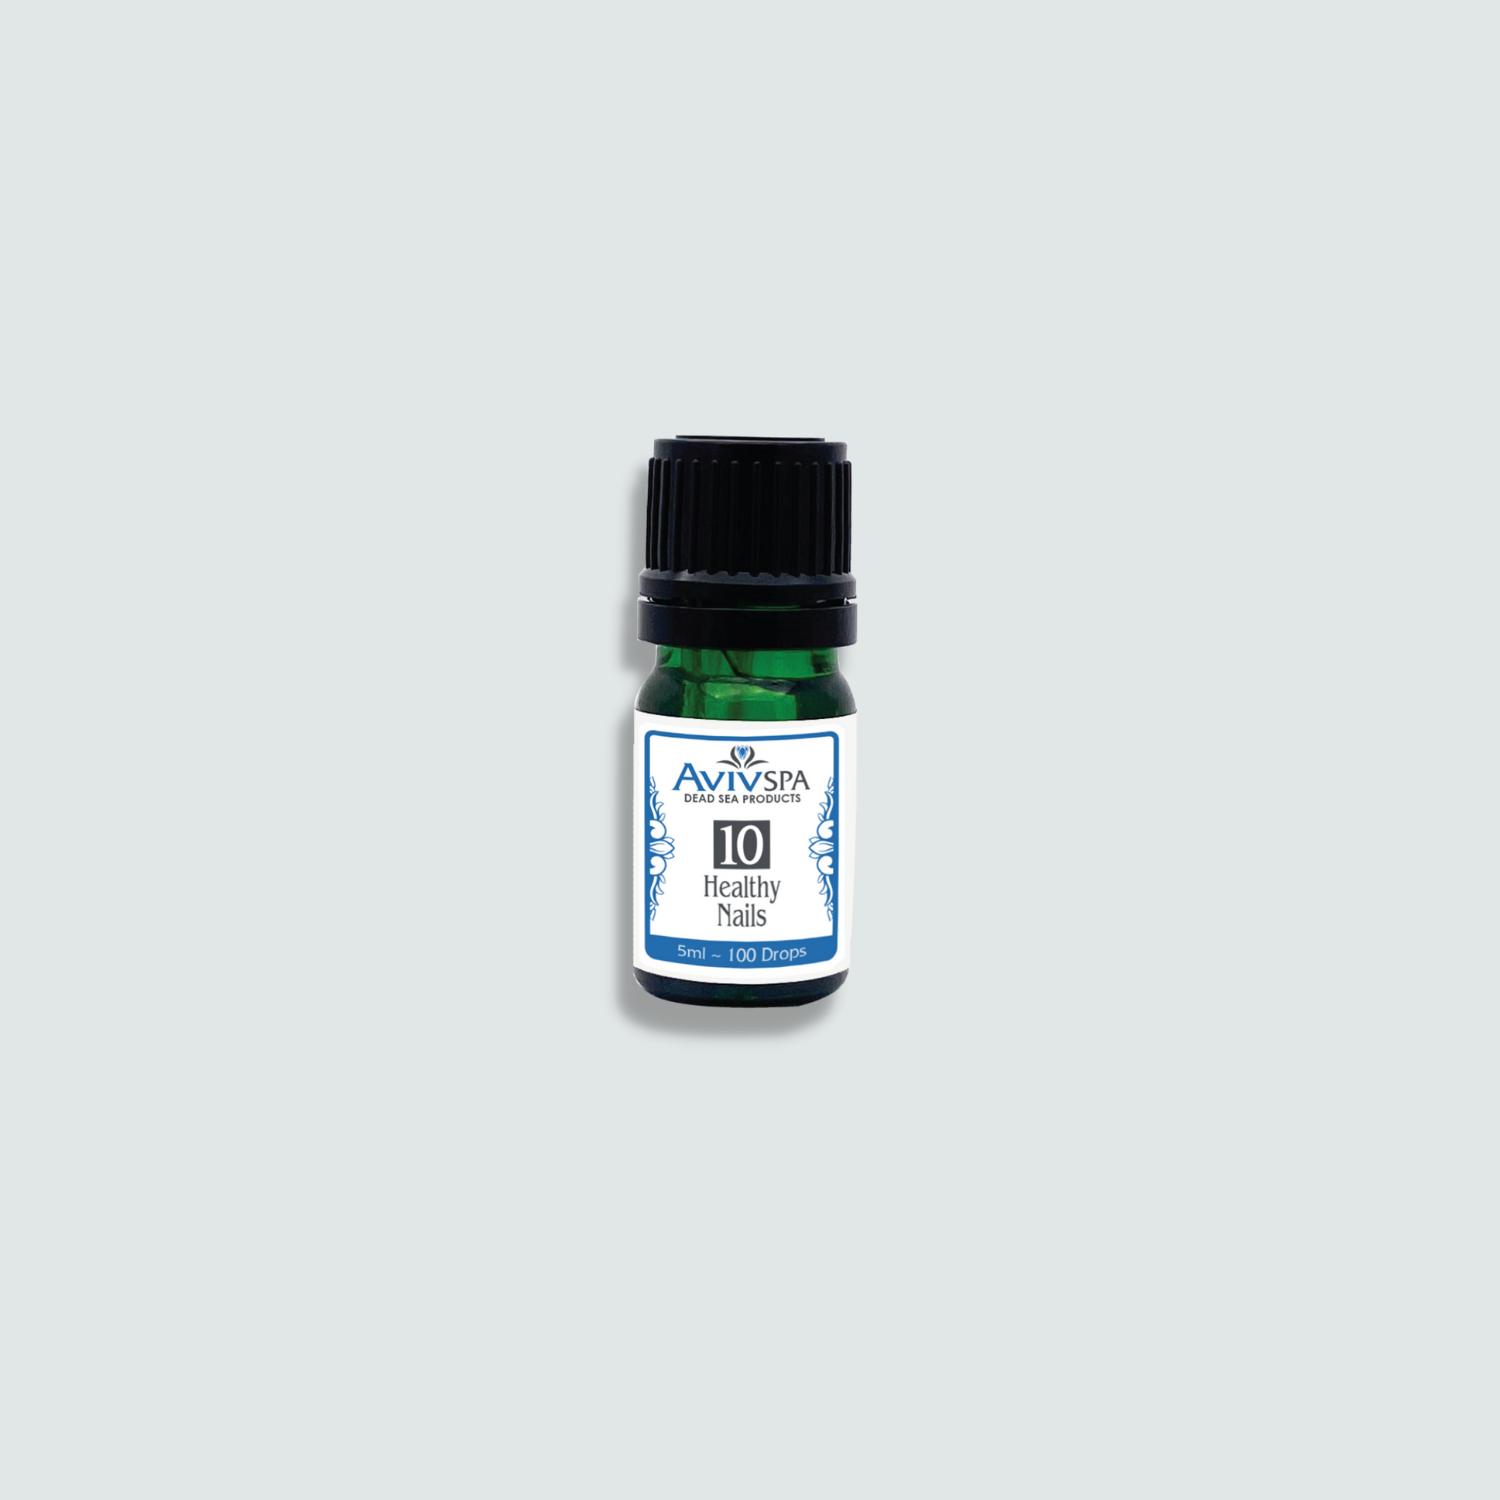 First Aid Botanical Essential Oil Blend for nail fungus issues